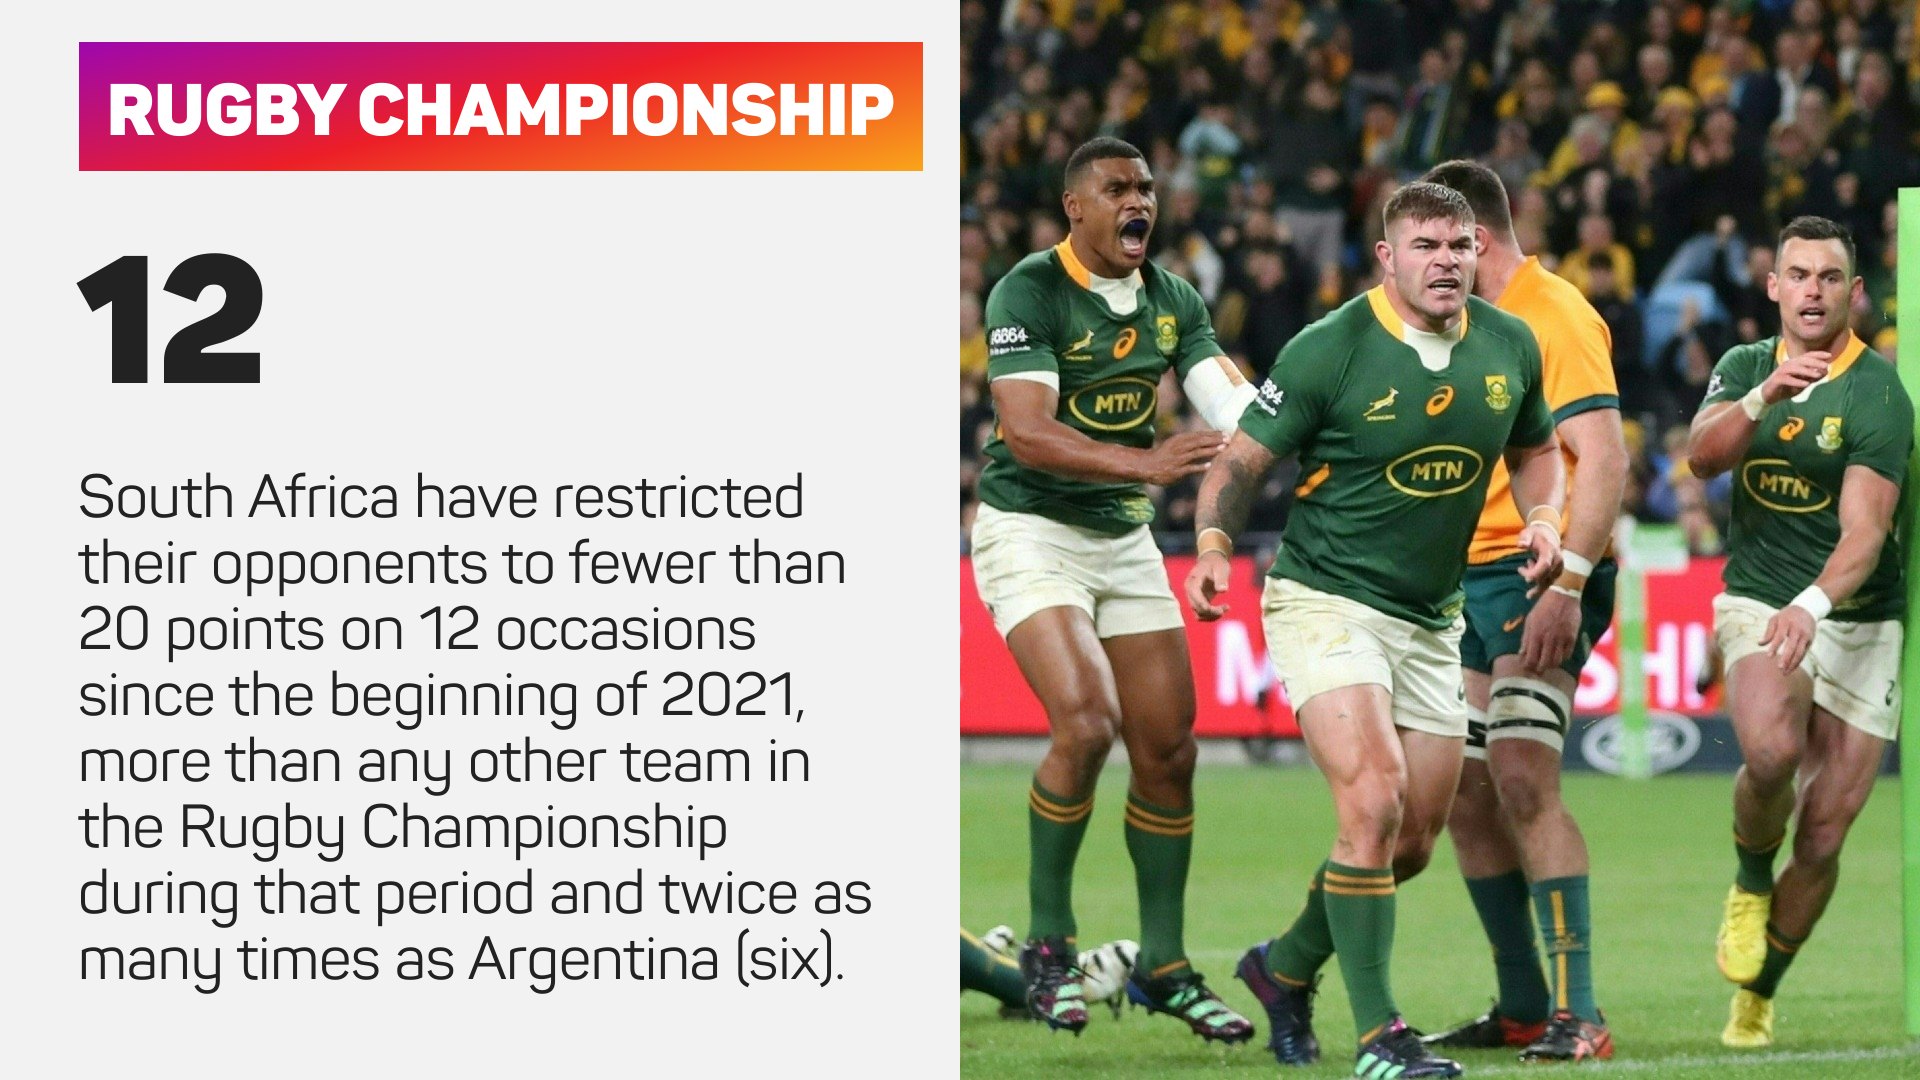 South Africa have restricted their opponents